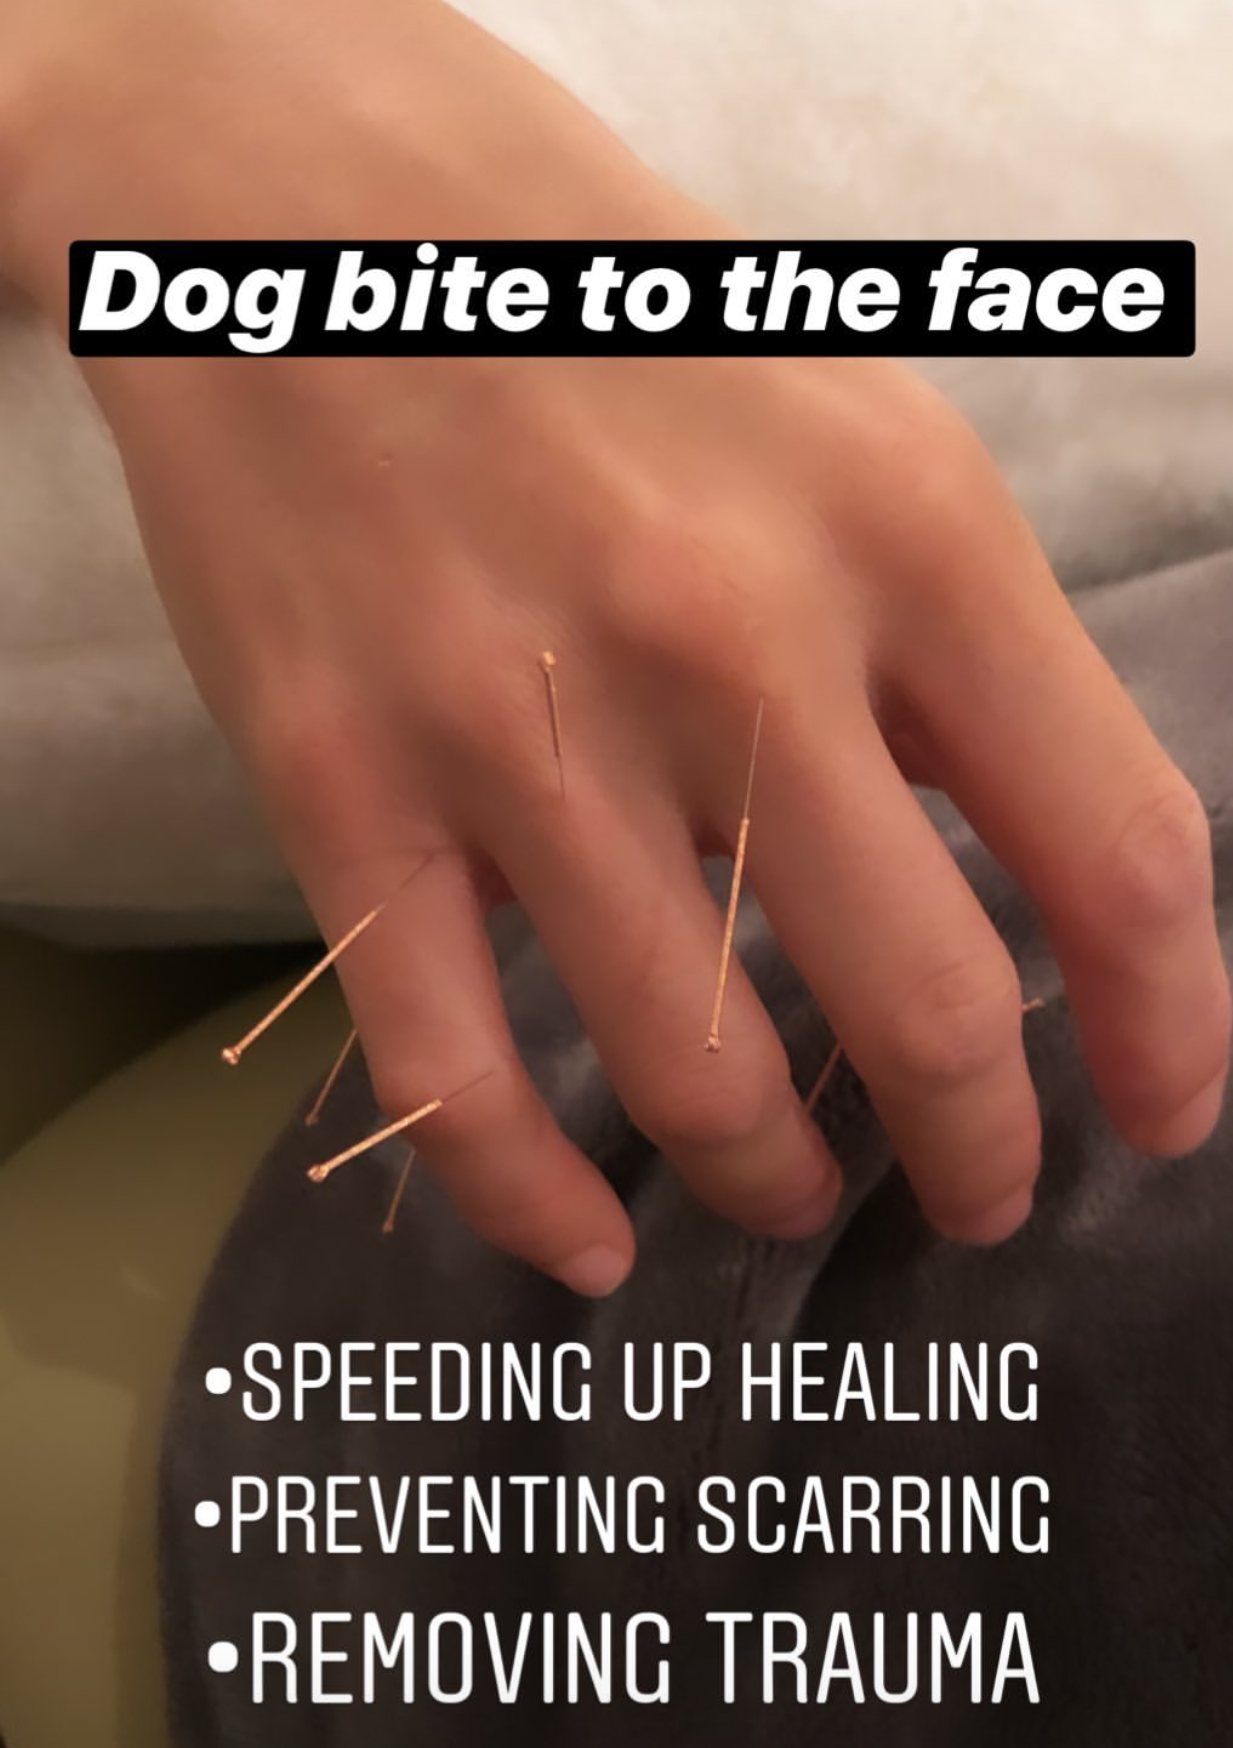  SuJok acupuncture treatment based in Vancouver used on patient who suffered a dog bite to the face. Acupuncture treatment worked to accelerate healing of the skin and prevent scarring. 